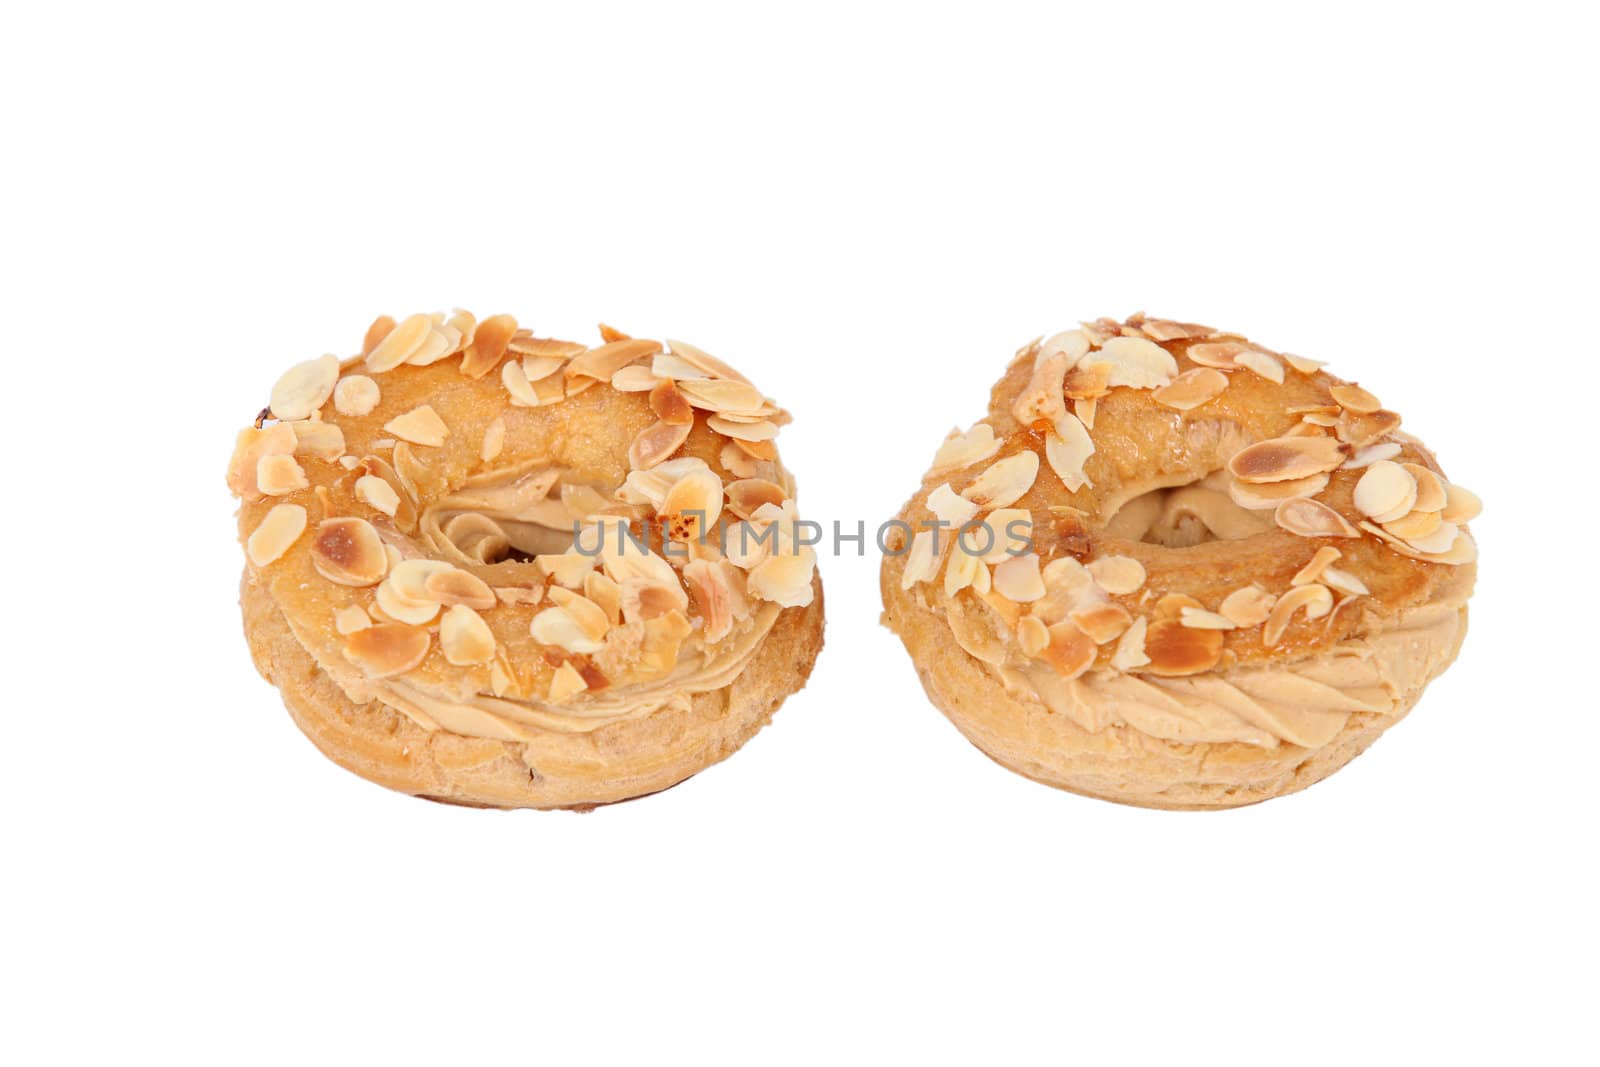 Almond topped pastries by phovoir